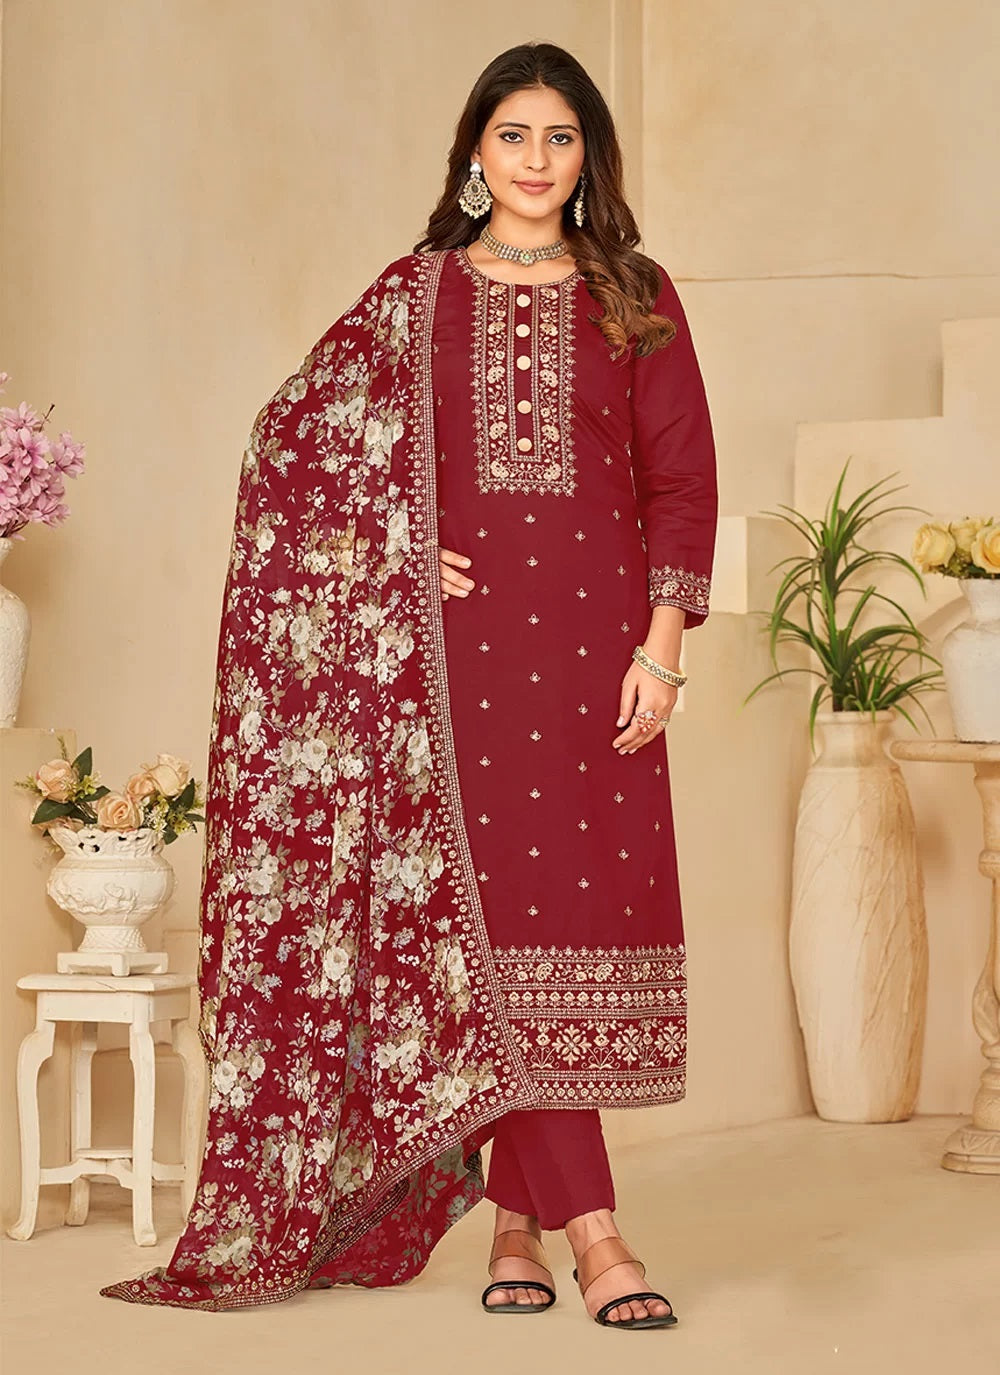 Maroon color straight cut Salwar kameez with sequins embroidery